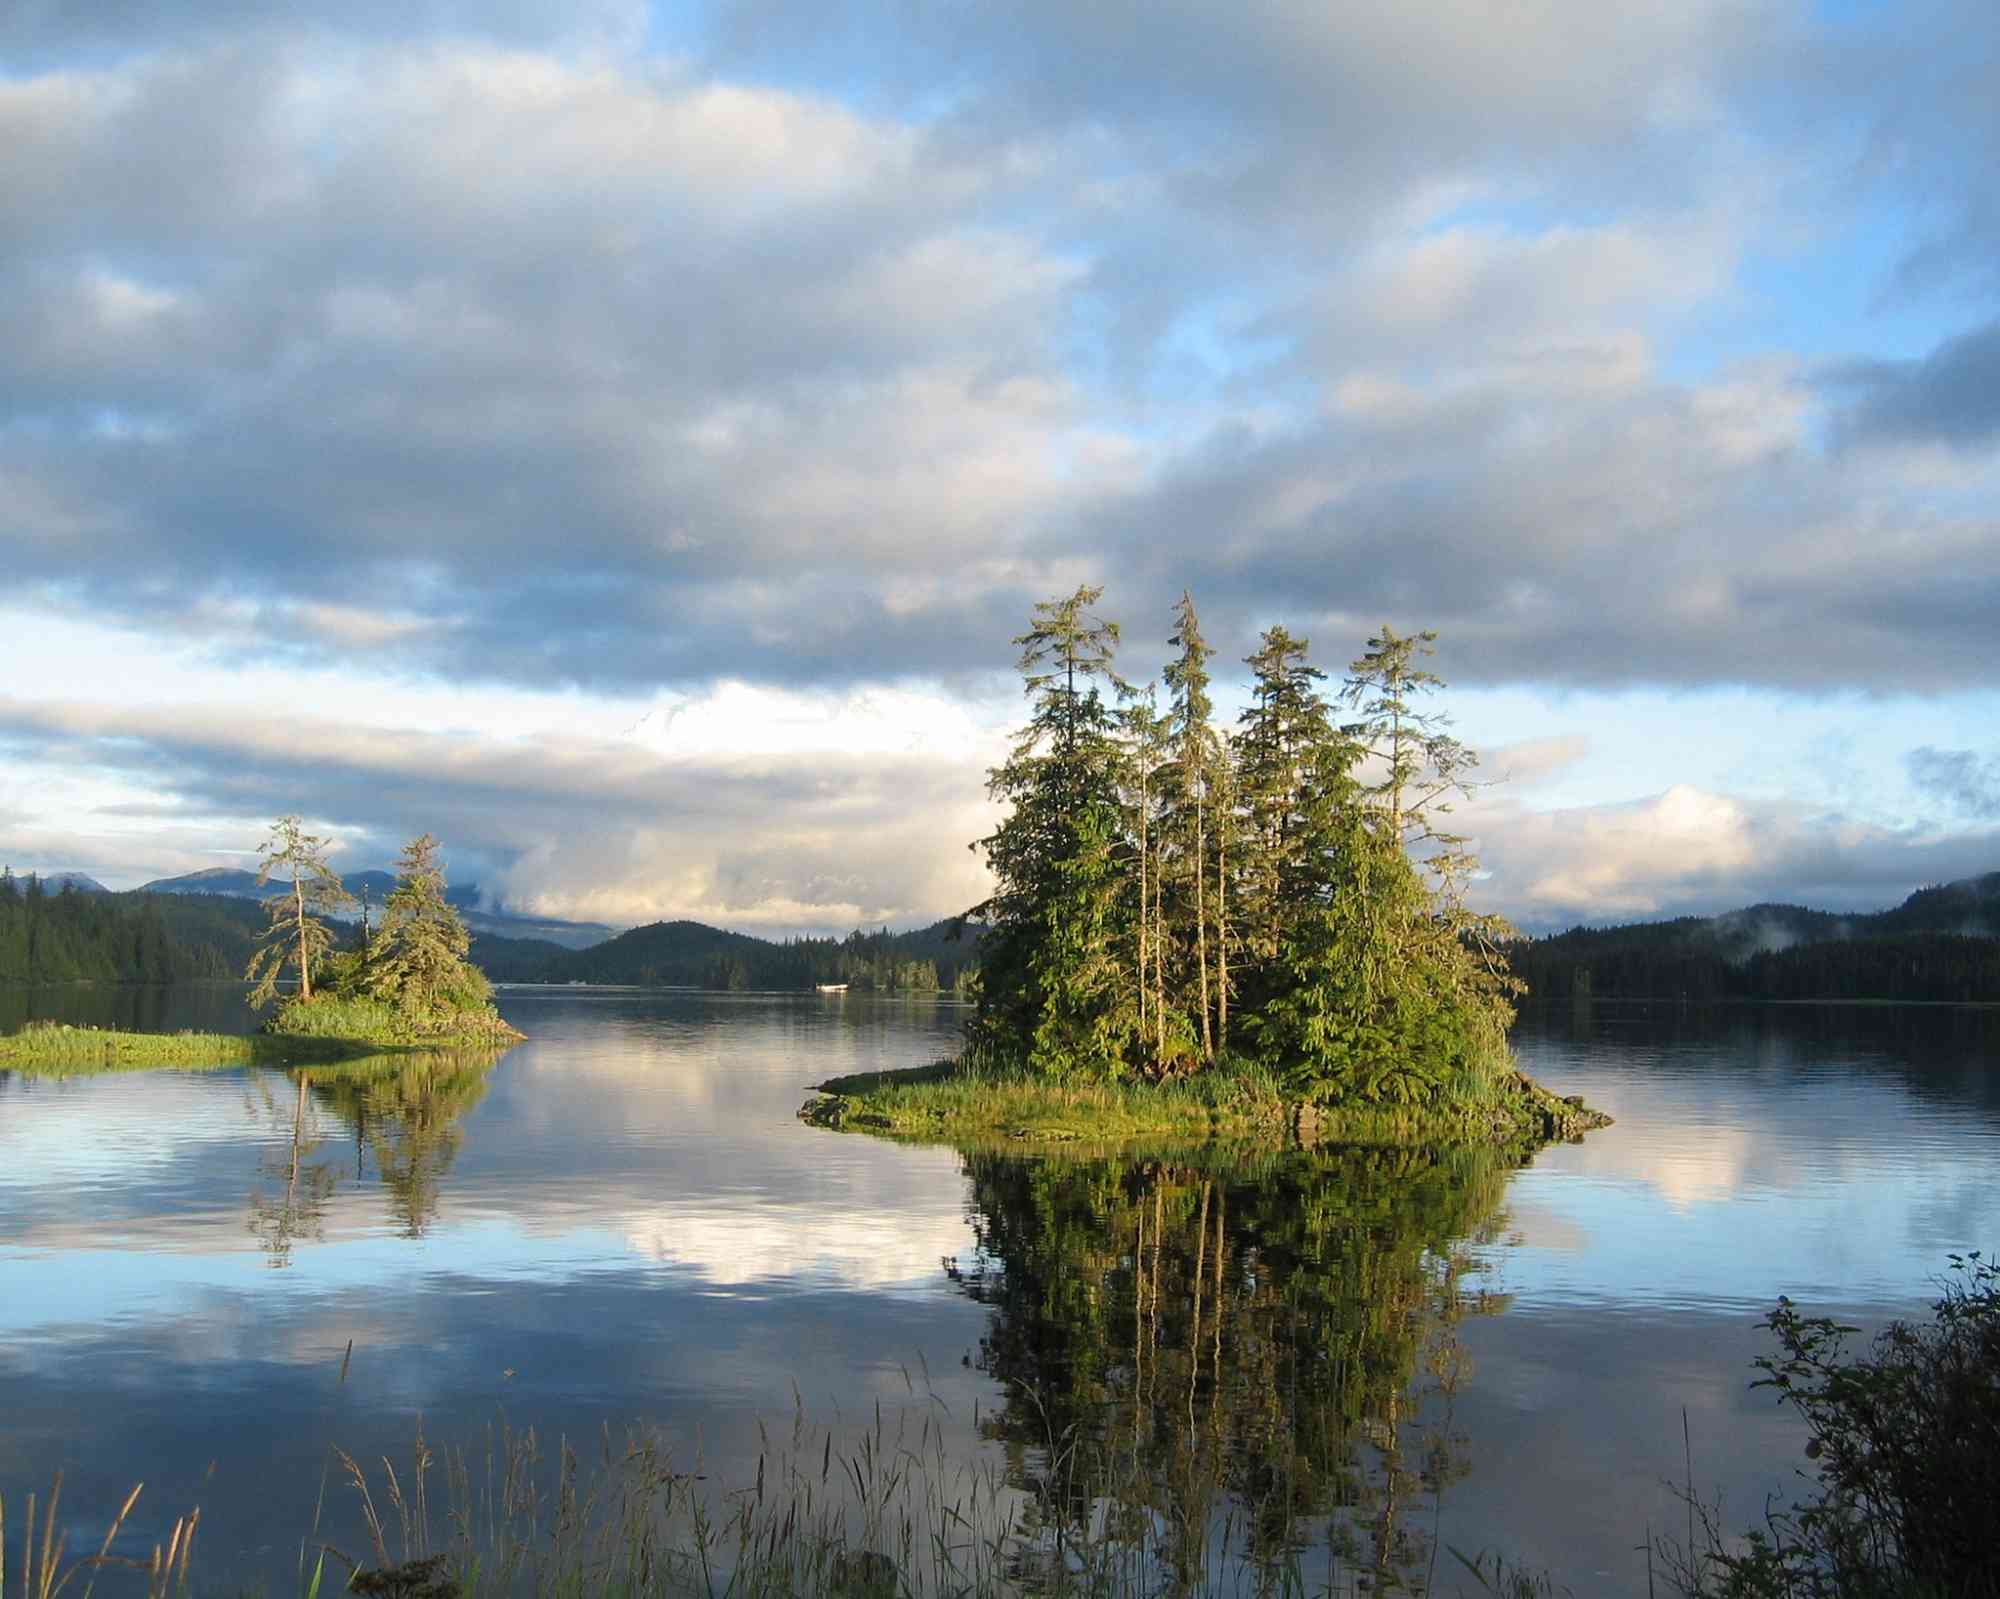 Thorne Bay in the Tongass National Forest